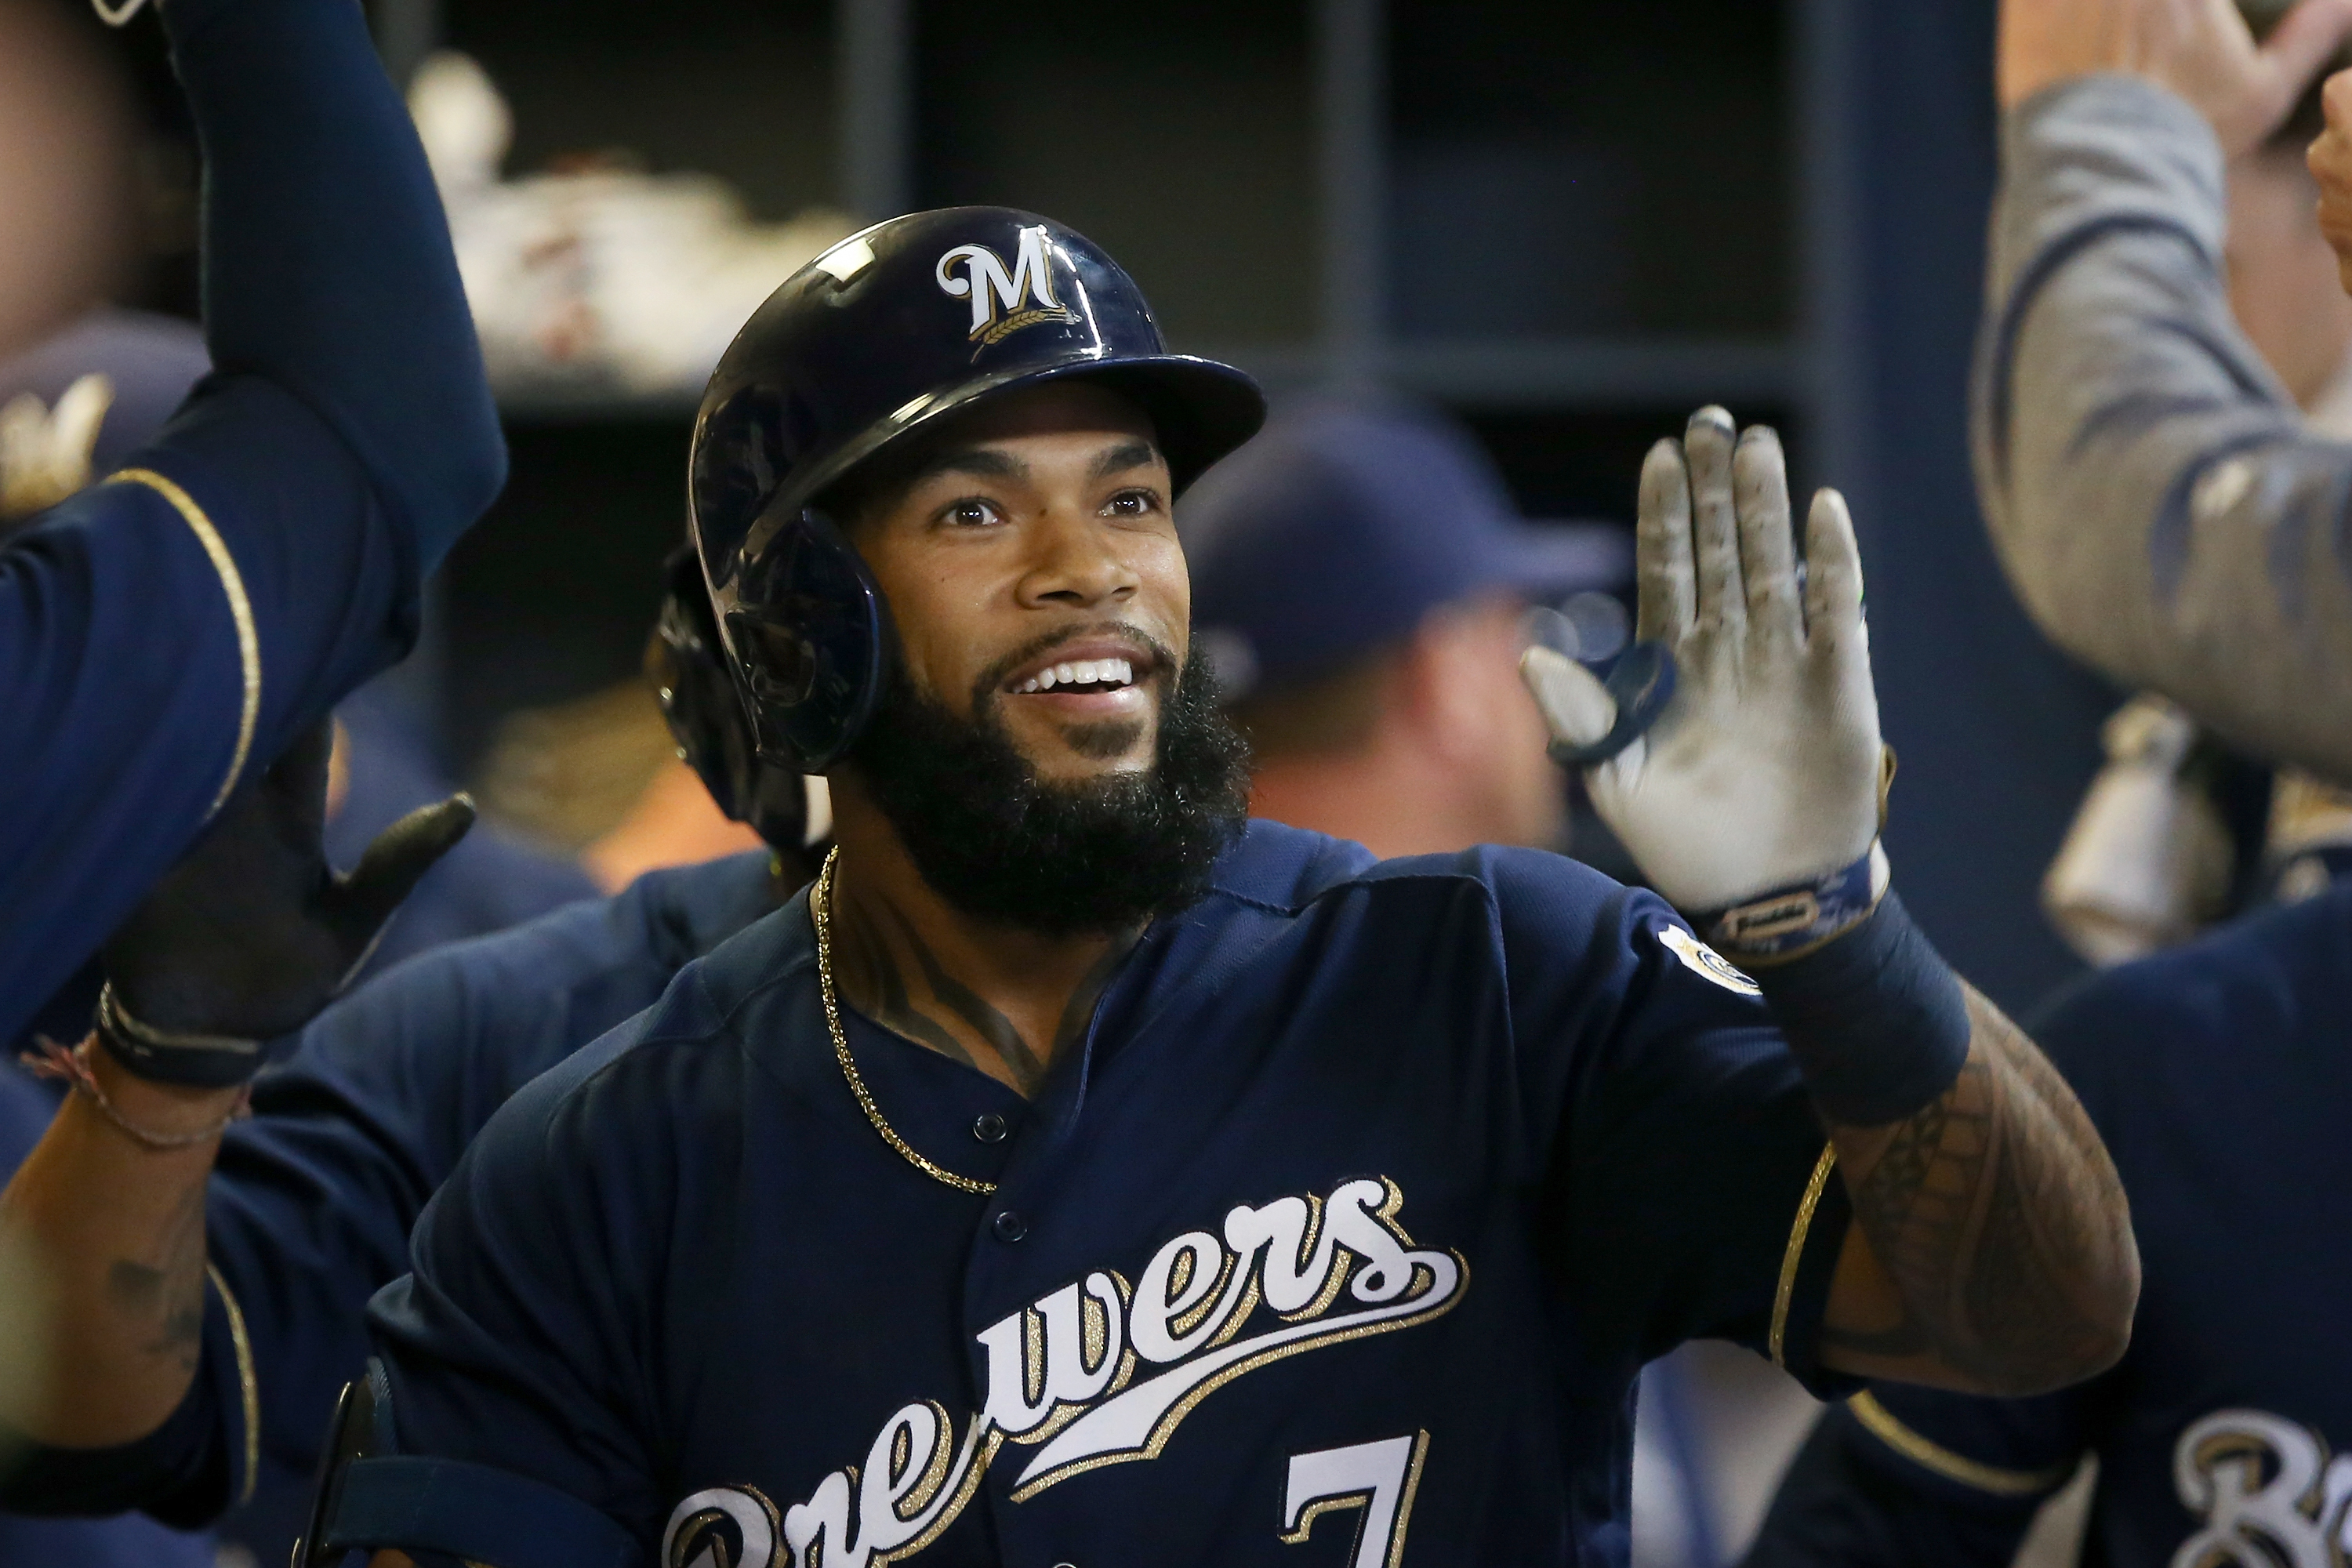 It has been Eric Thames' turn to play as Brewers look for offense